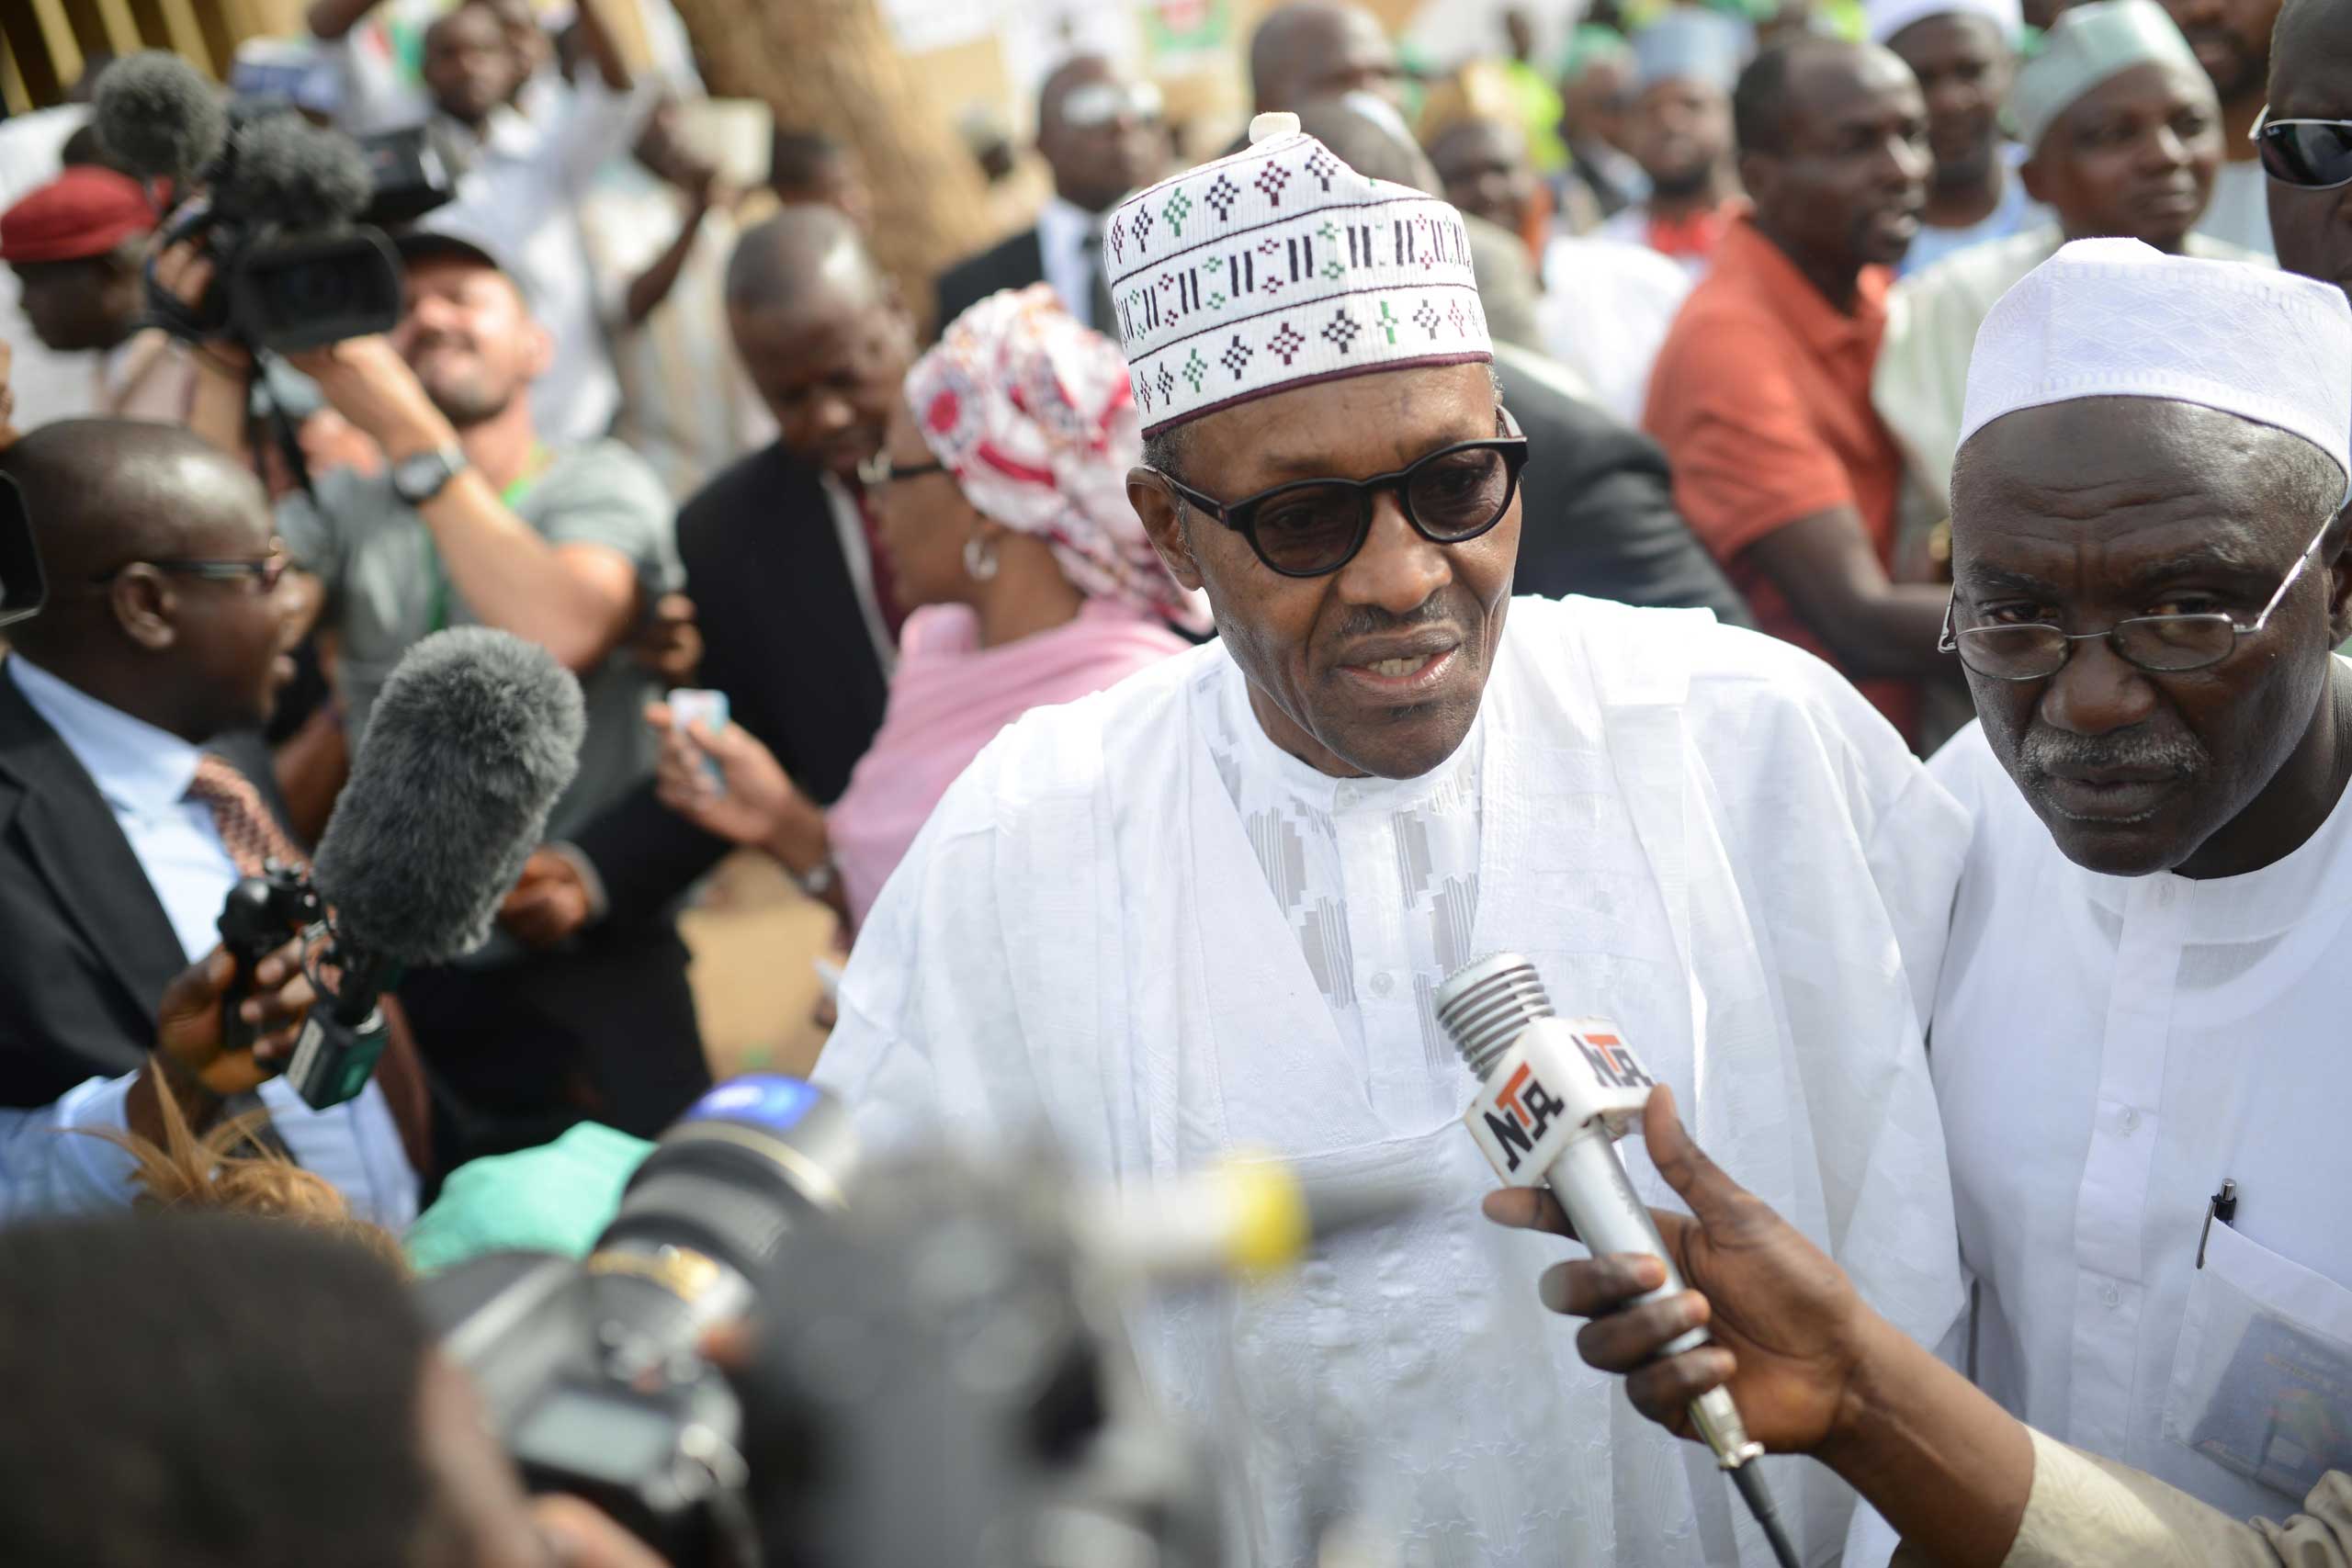 Mohammadu Buhari, the presidential candidate of the main opposition party All Progressives Congress, speaks to the press as he arrives for registration at Gidan Niyam Sakin Yara polling station in Daura district of Katsina, Nigeria, on March 28, 2015 (Anadolu Agency—Getty Images)